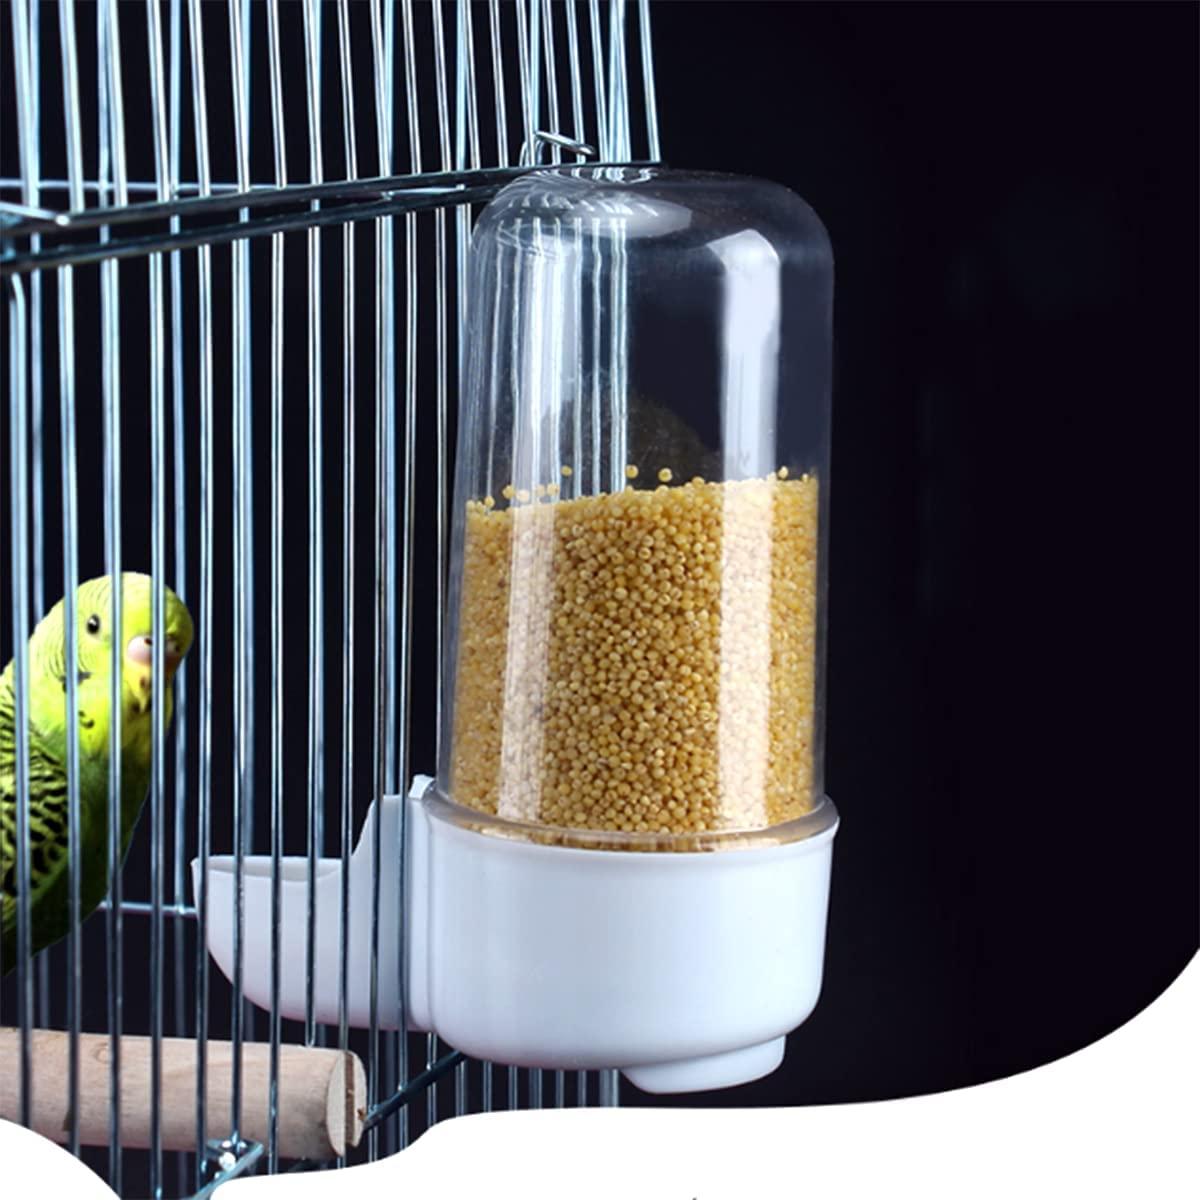 Bird Feeder, Bird Water Dispenser for Cage, XISTEST 2PCS Automatic Bird Water  Feeder with 1PCS Food Feeder for Cage Pet Parrot Budgie Lovebirds Cockatiel  Automatic Bird Feeder 2pcs 140ml + 1pcs 150ml